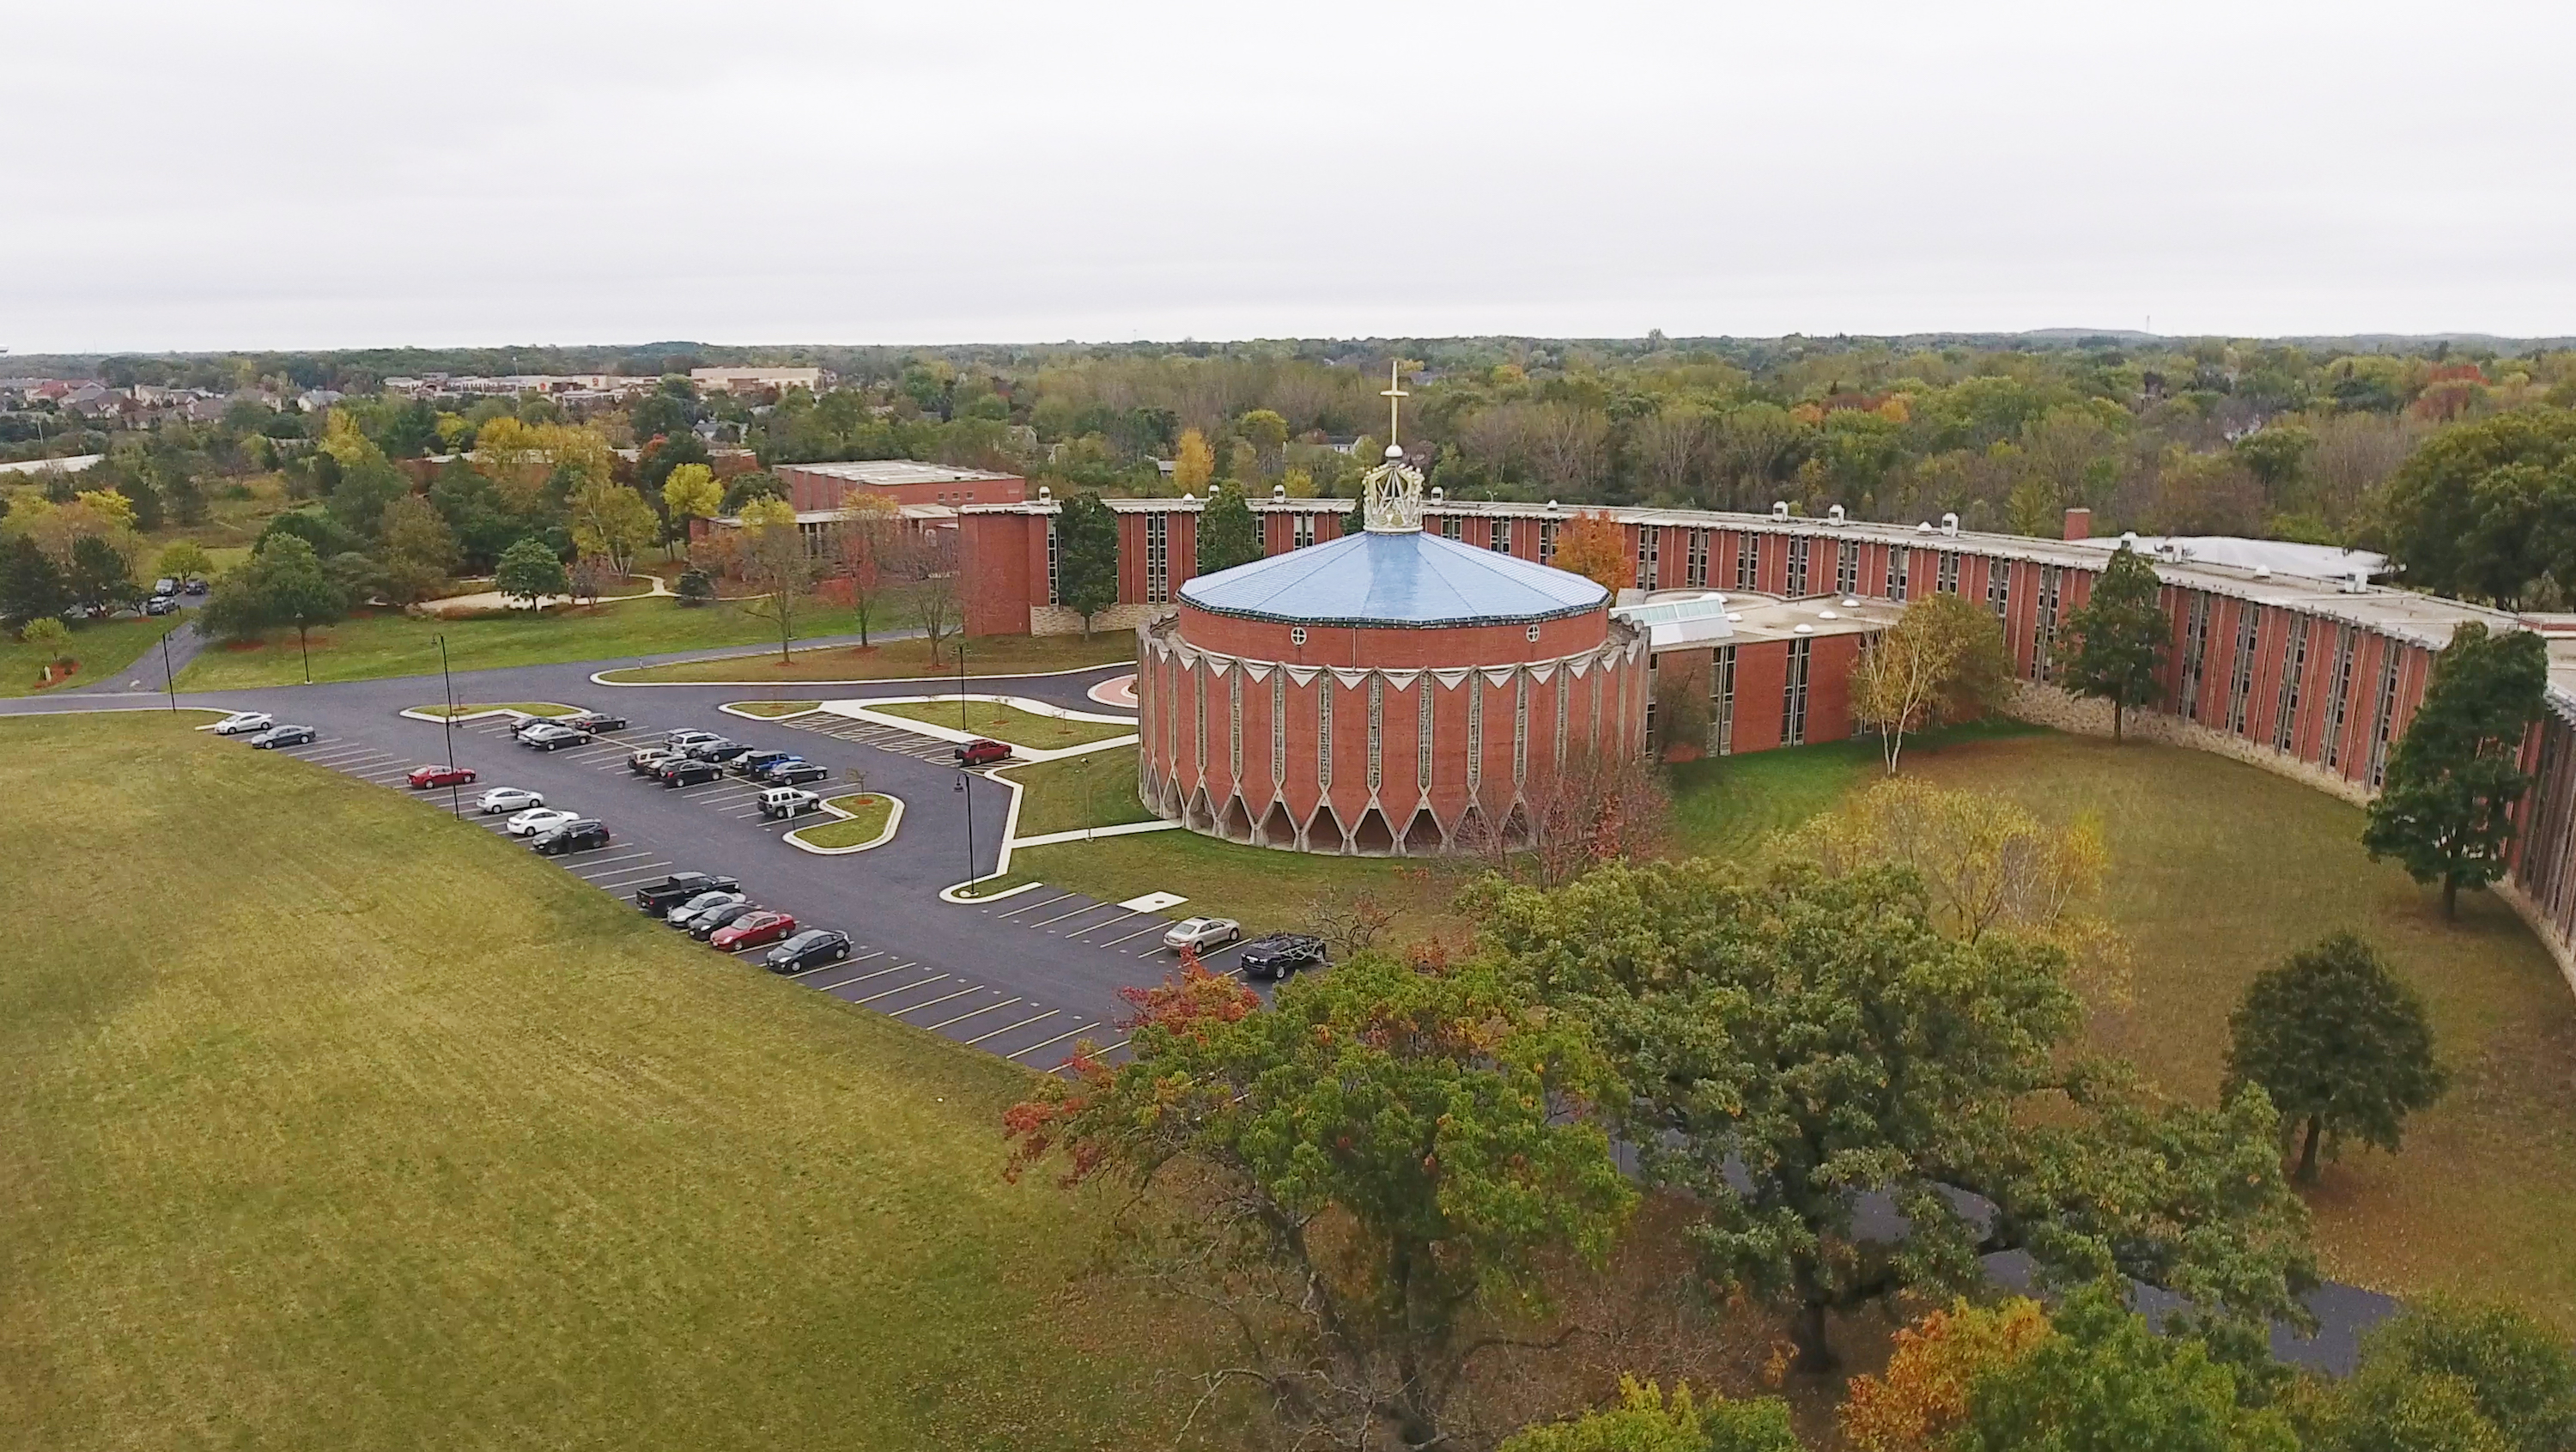 This aerial photograph provides a view of the Sacred Heart Seminary and School of Theology campus as it looks today.